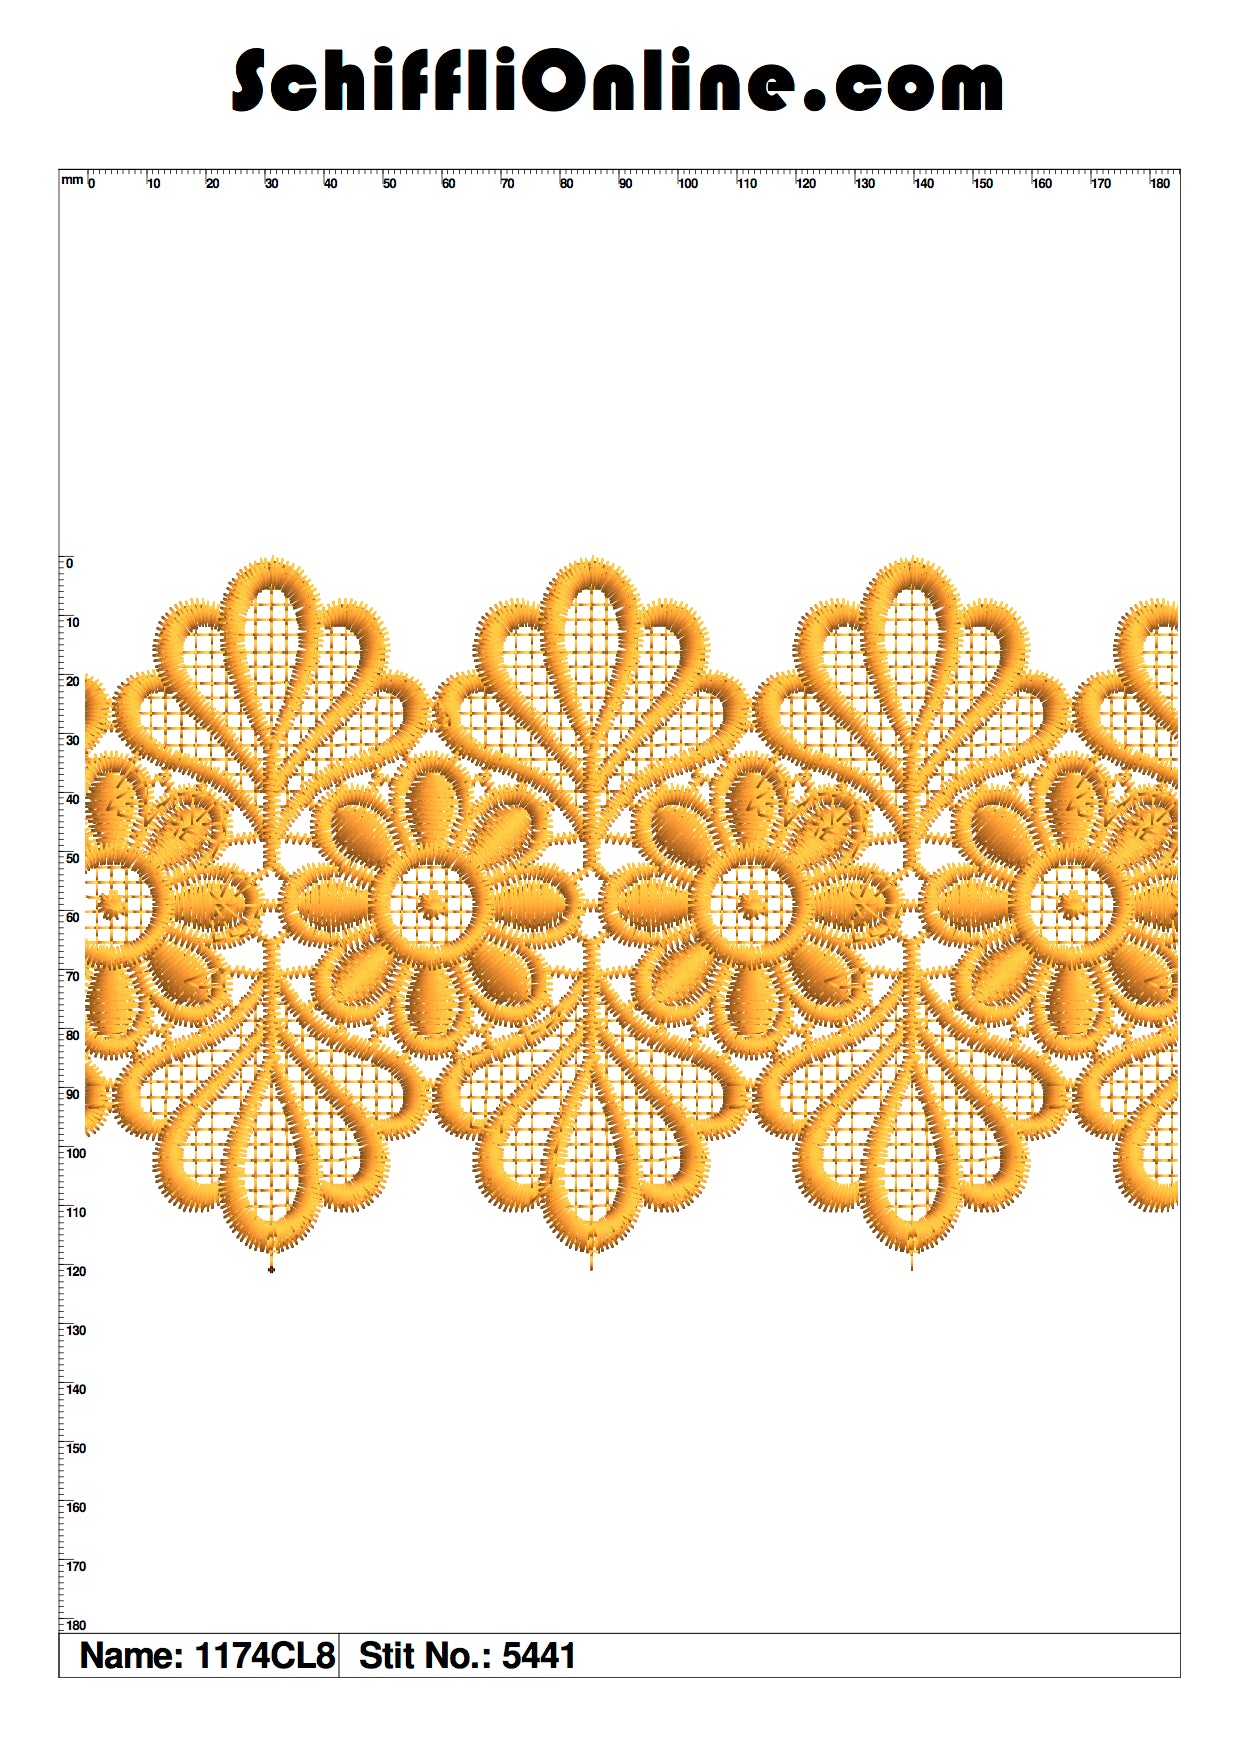 Book 140 CHEMICAL LACE 8X4 50 DESIGNS